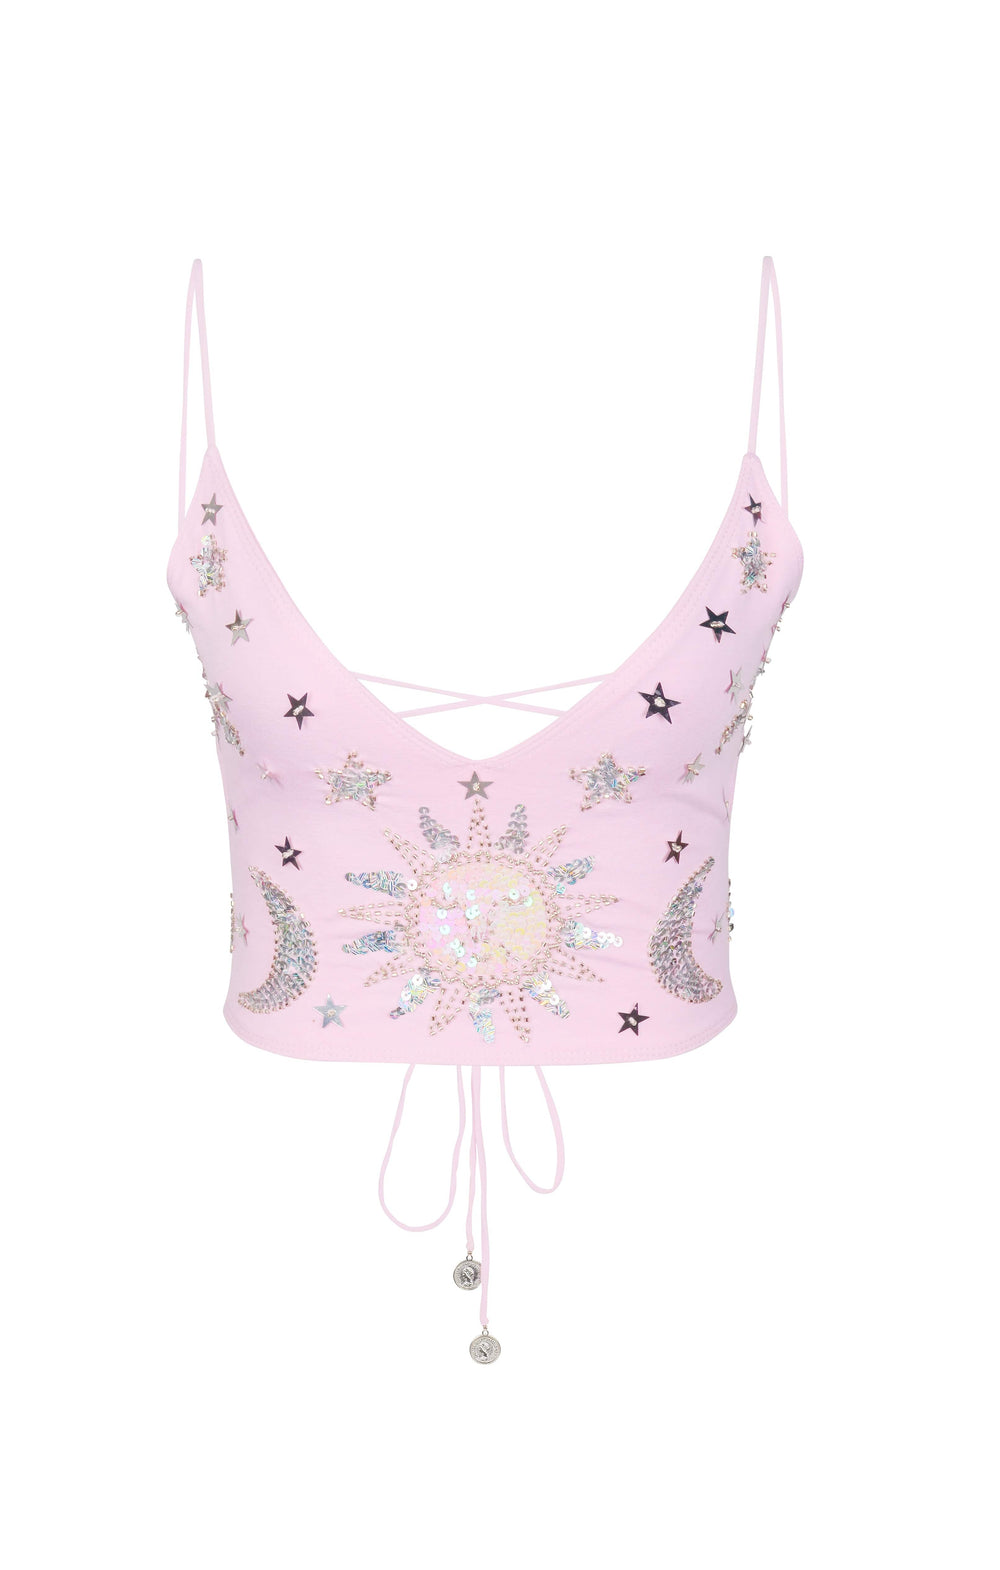 STELLA SEQUIN SPARKLE BACKLESS TOP - PINK/SILVER - Her Pony